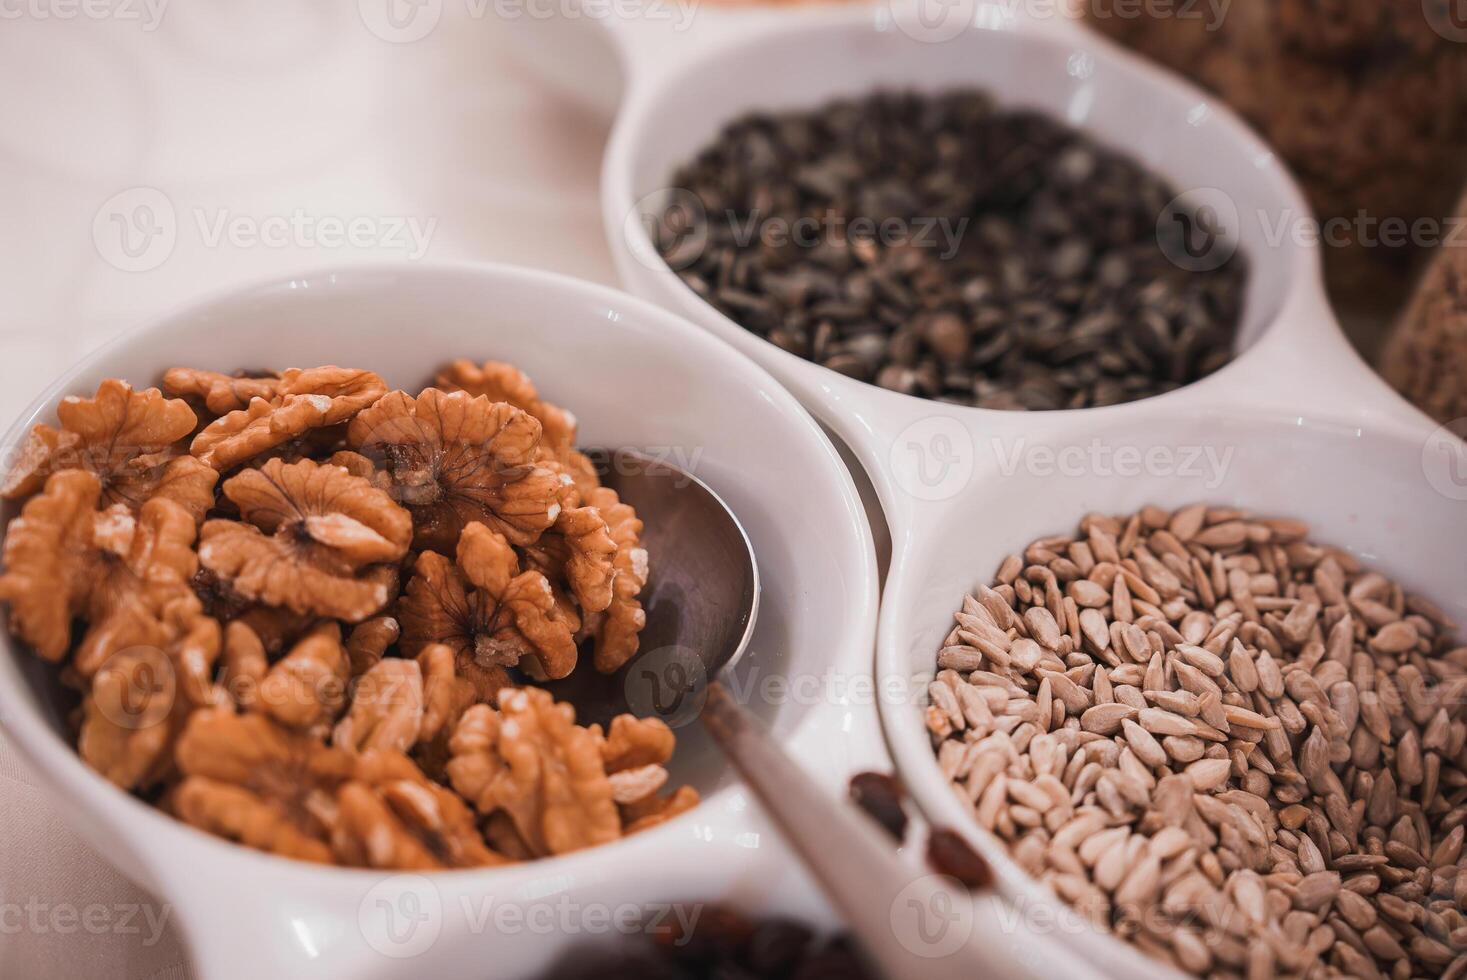 Assorted nuts and seeds in bowl on table in dim lighting, Venetian hotel interior. photo